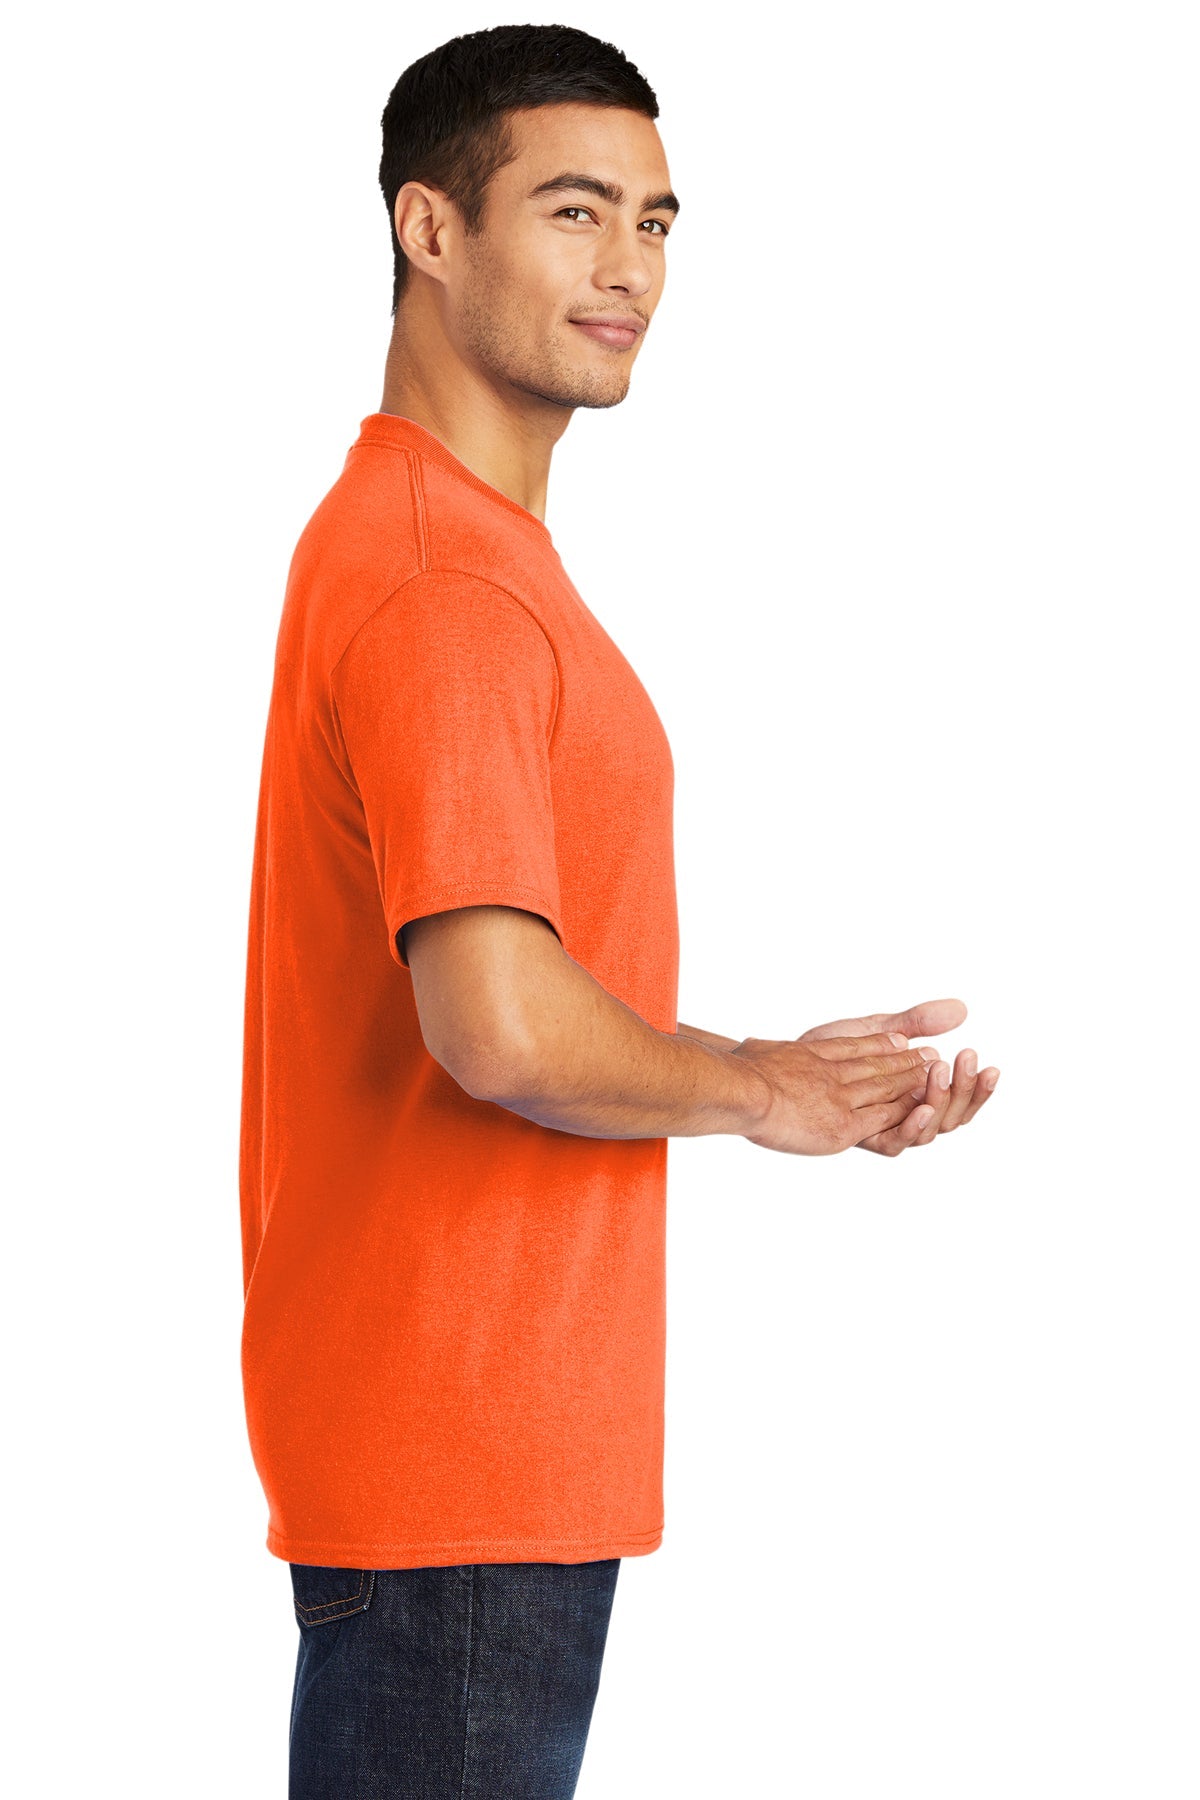 Port & Company Tall Core Blend Customized Tee's, Safety Orange